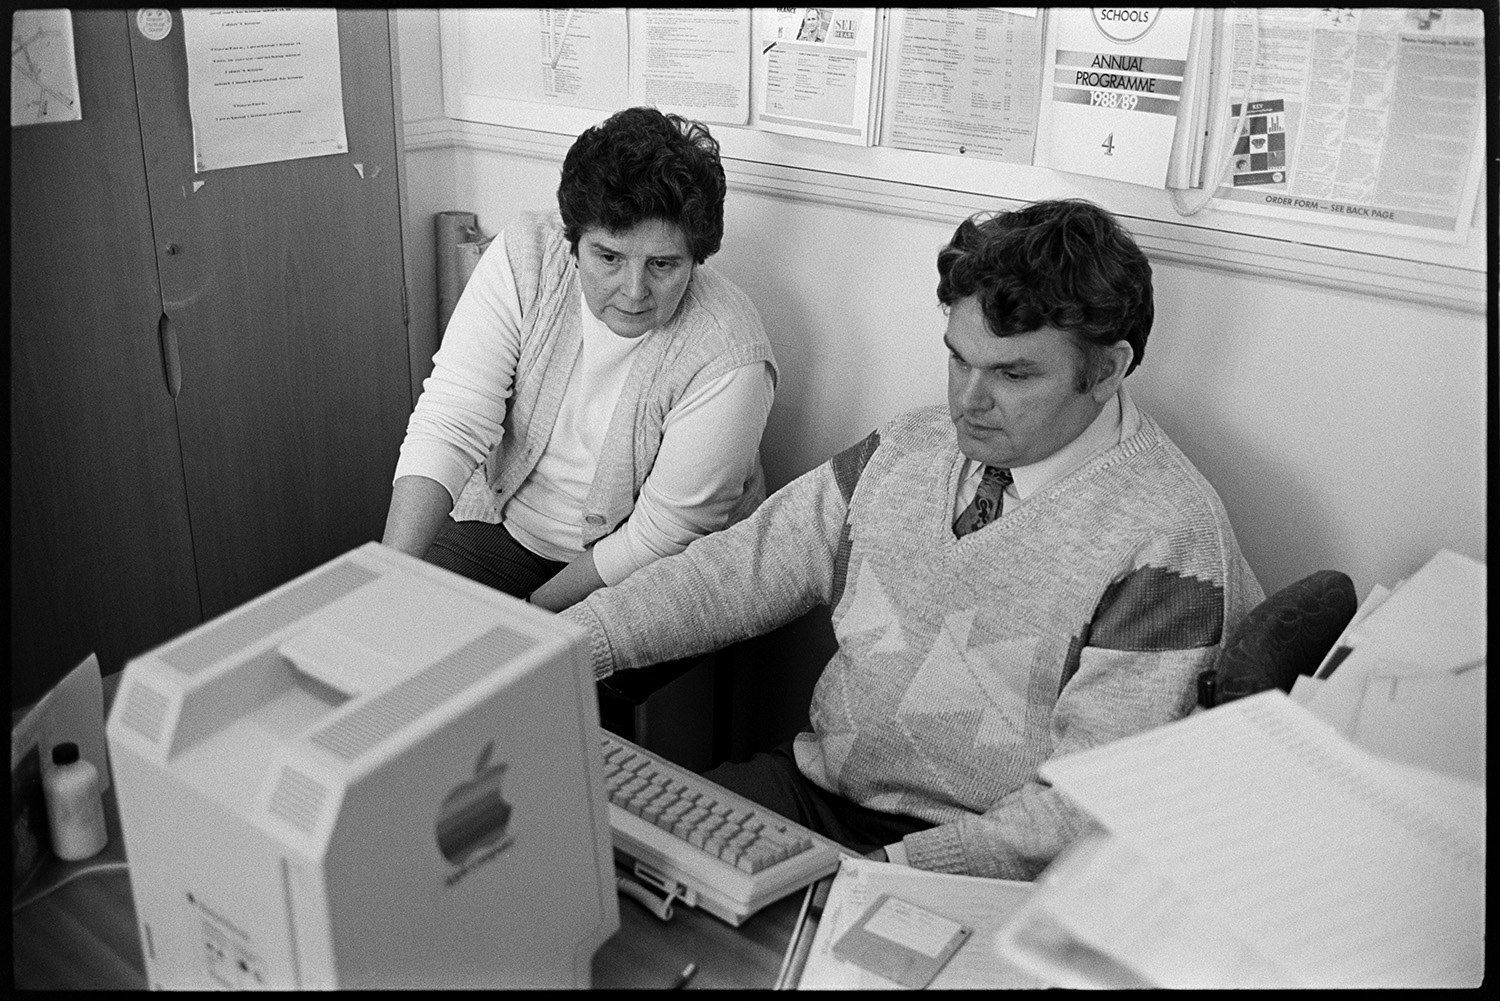 School on Red Nose Day, for Comic Relief. Headmaster sitting at desk, computer. 
[Two staff members at Chulmleigh Community College sat in an office at desk with computers. The 'Apple' brand can be seen on one of the computers.]